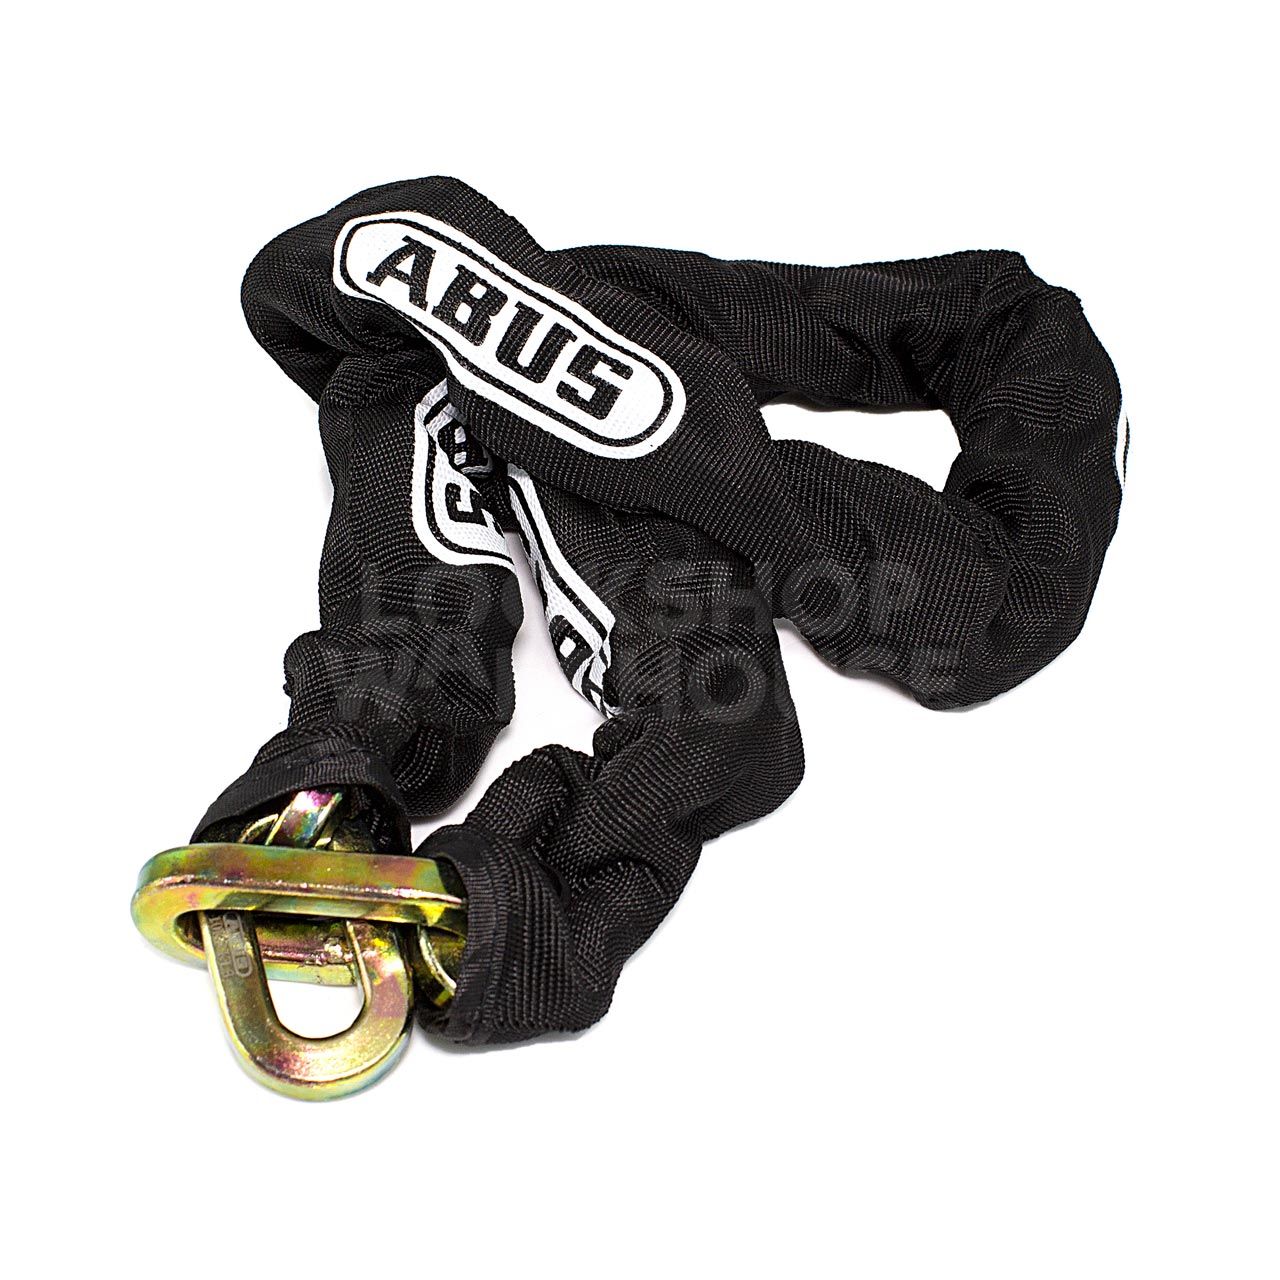 ABUS 10KS 10mm Square Link Security Chain